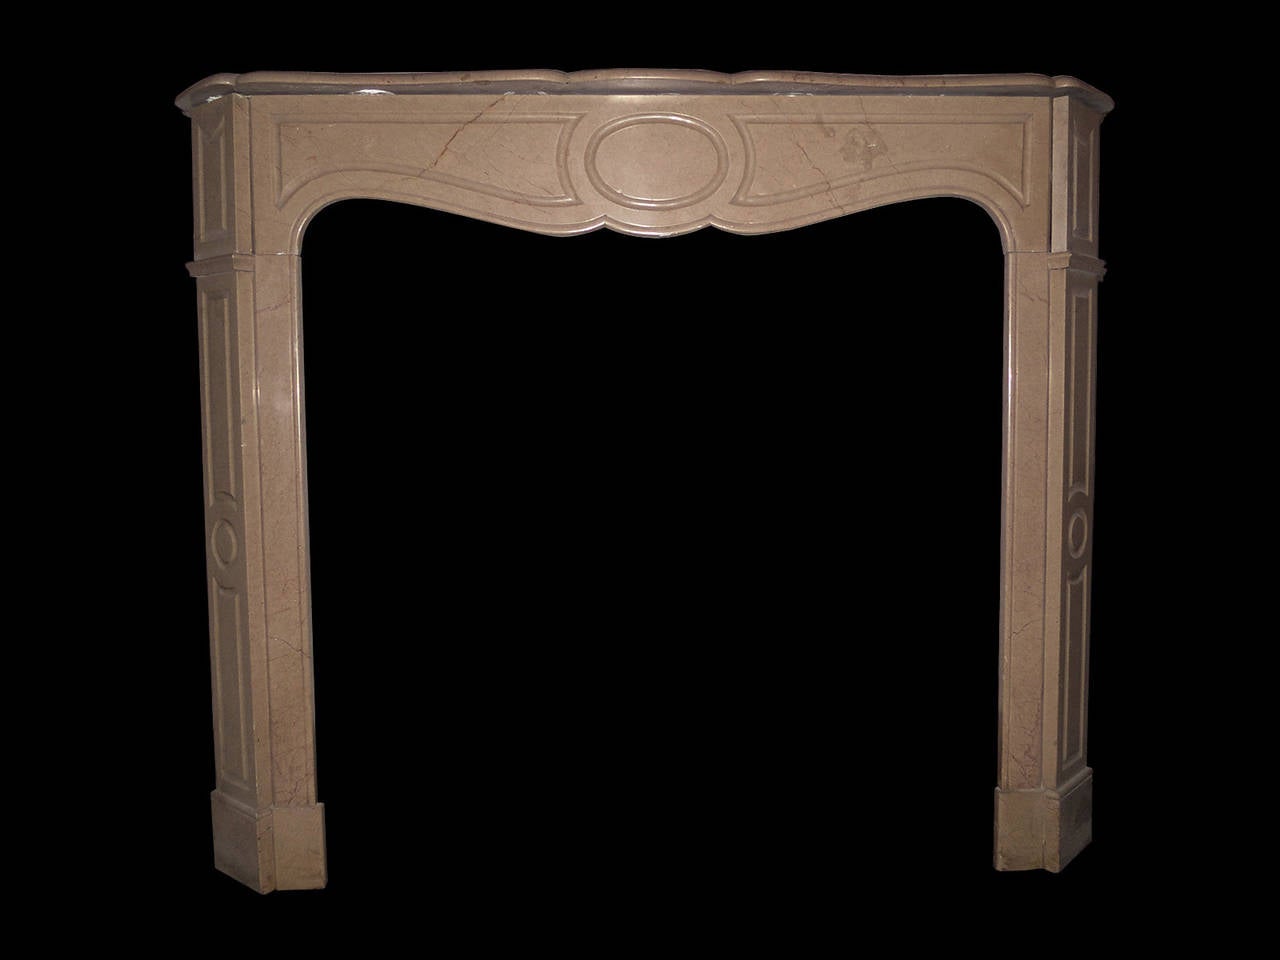 An antique French pompadour fireplace surround in a lightly veined creamy brown marble.